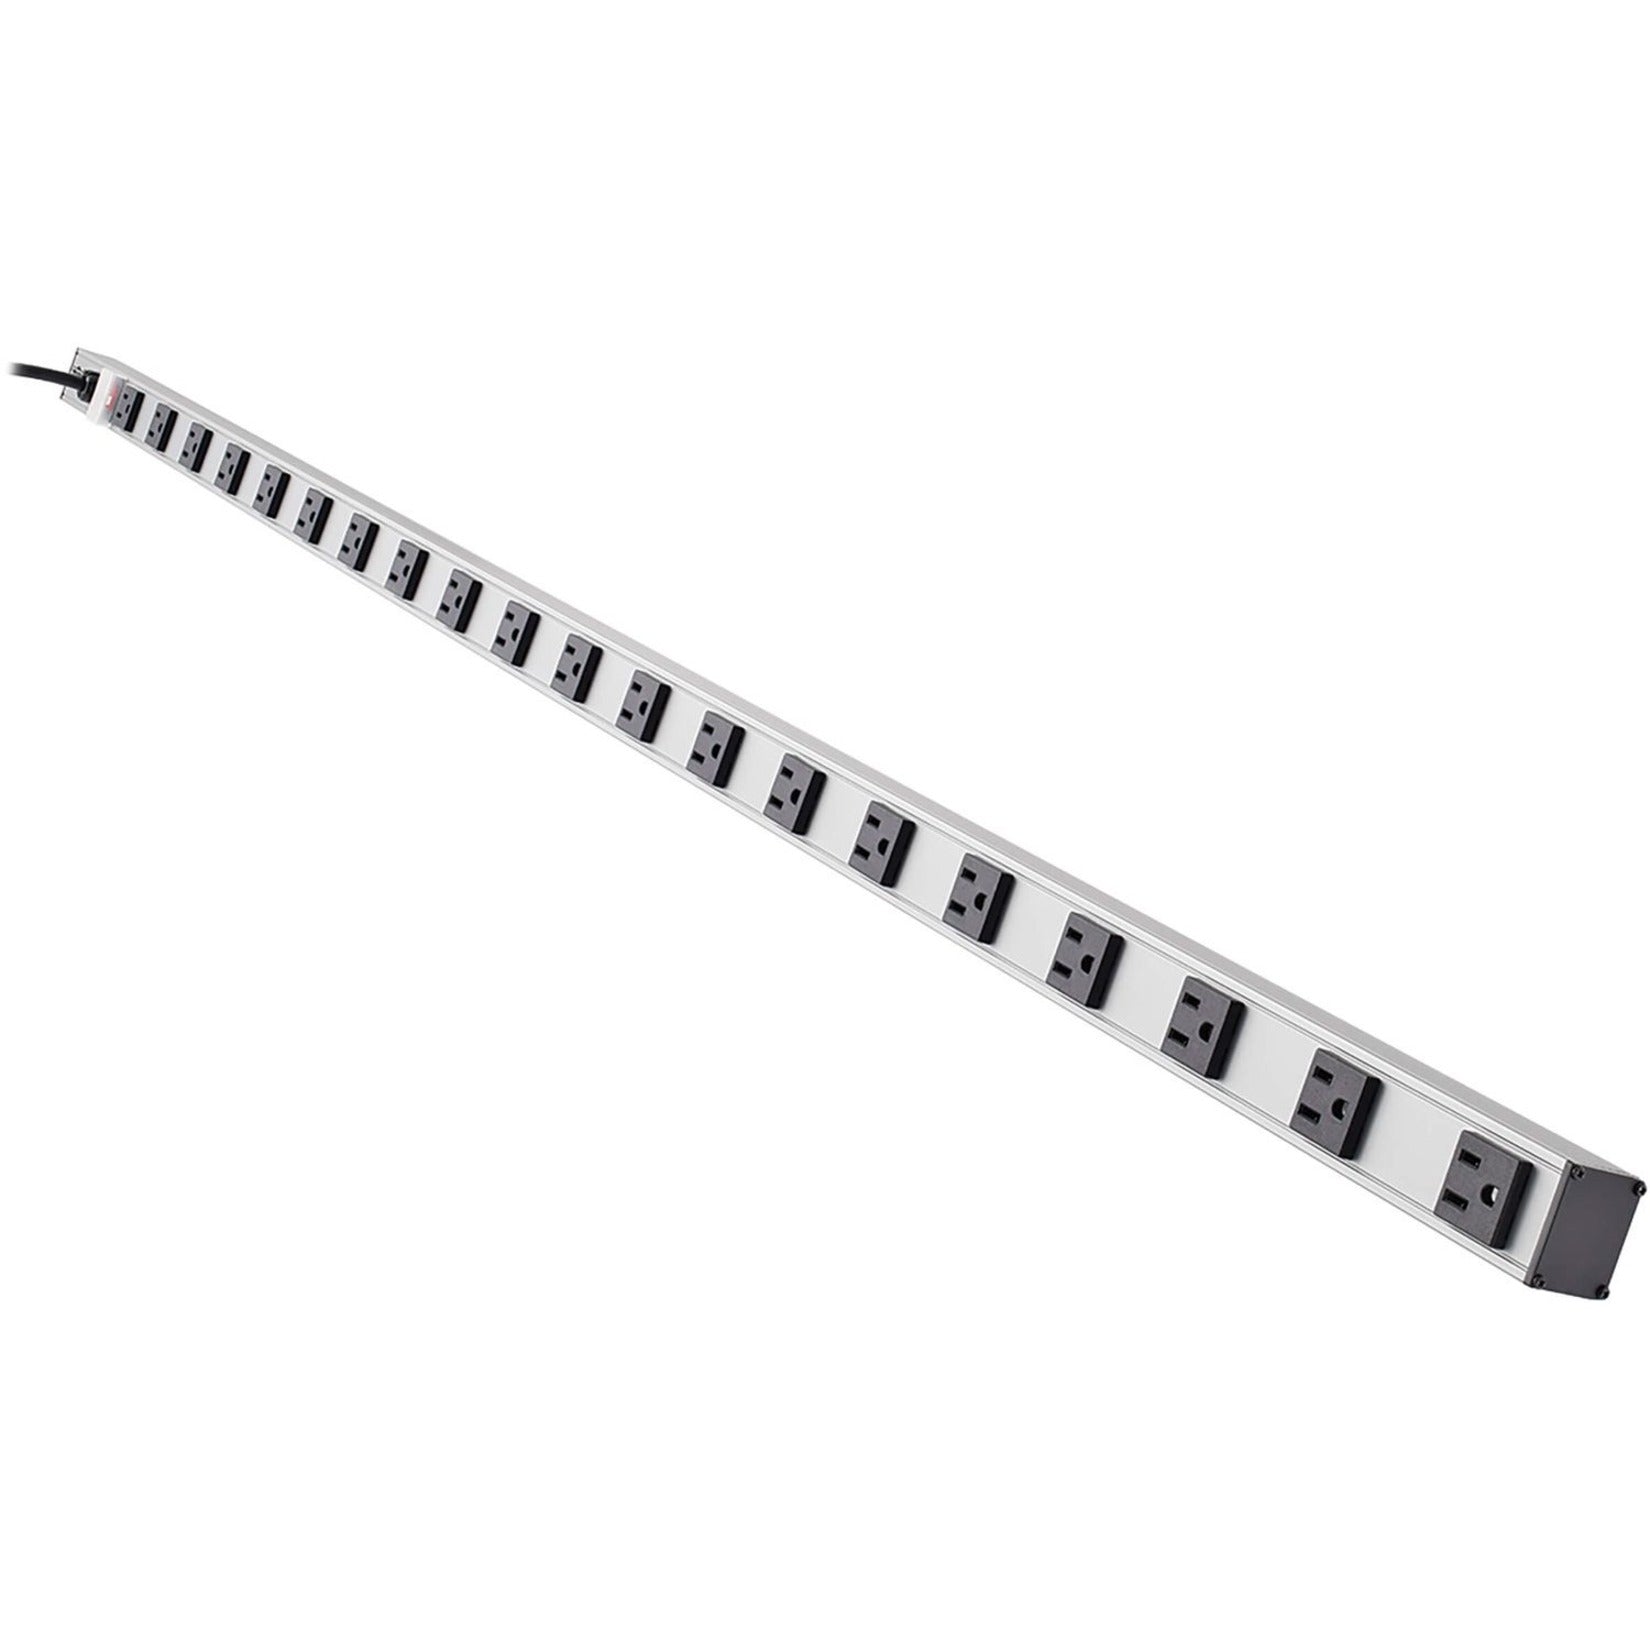 Tripp Lite PS6020 Power Strip 120V AC, 20 Outlet Strip, 15ft Cord, 60in Length, Switch Metal